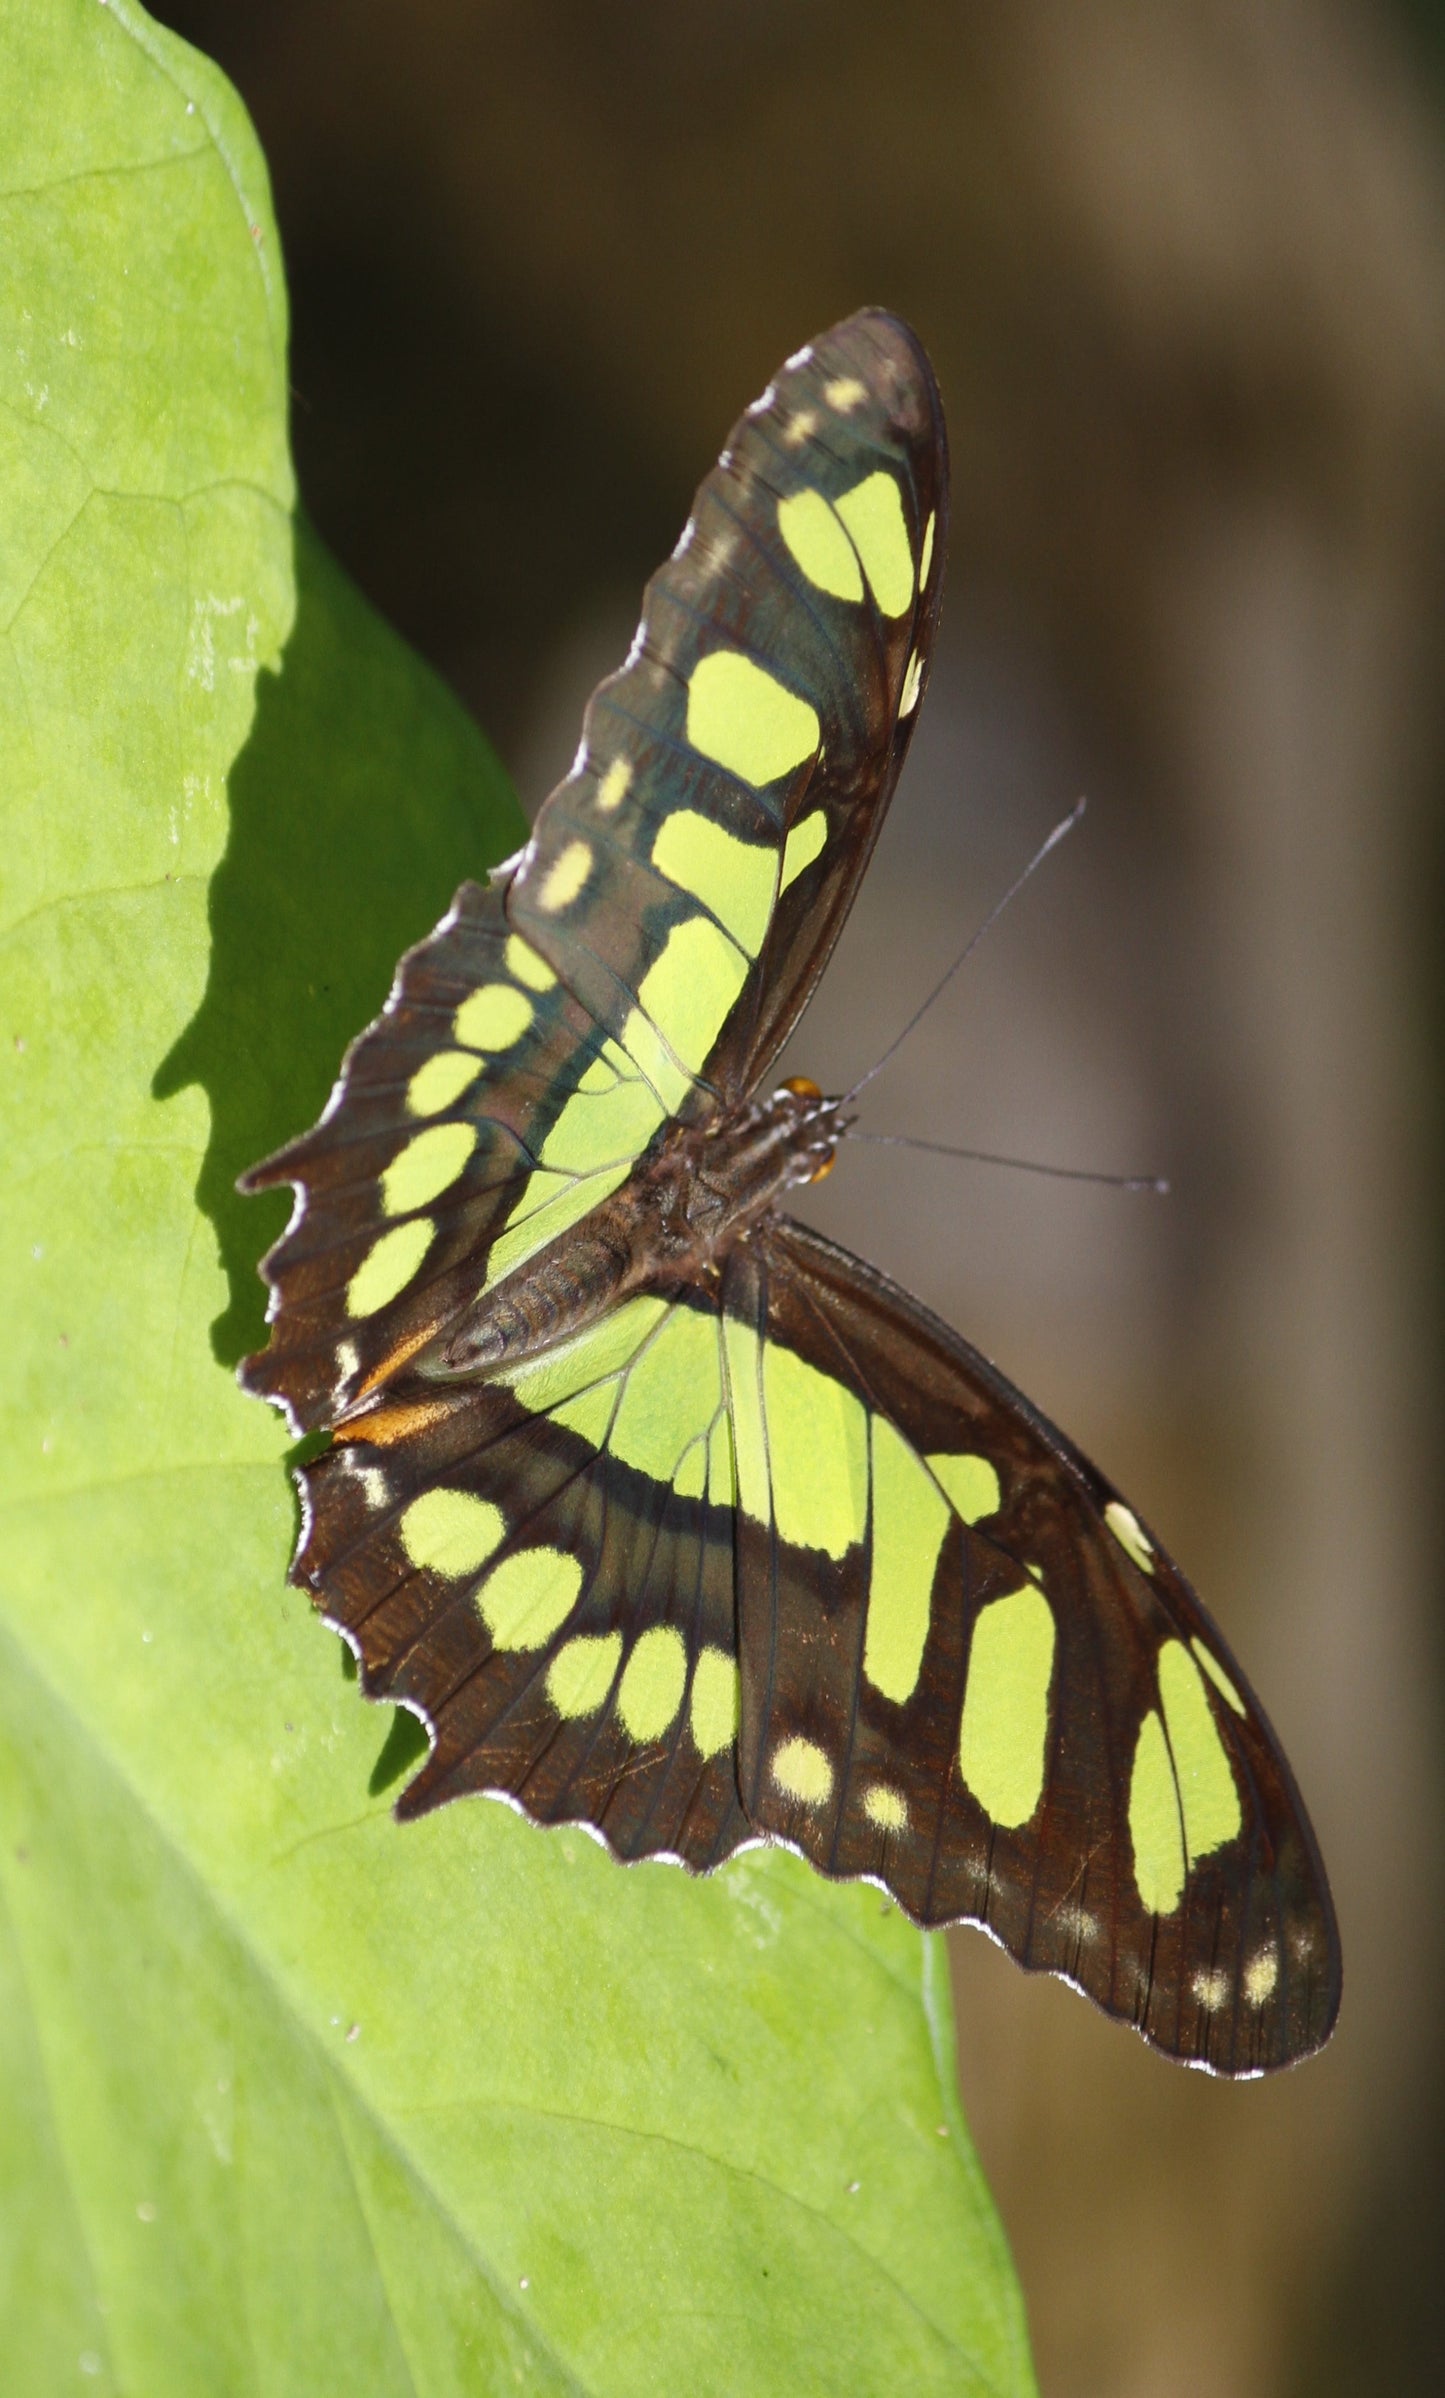 malachite butterfly uses  green shrimp as a host plant